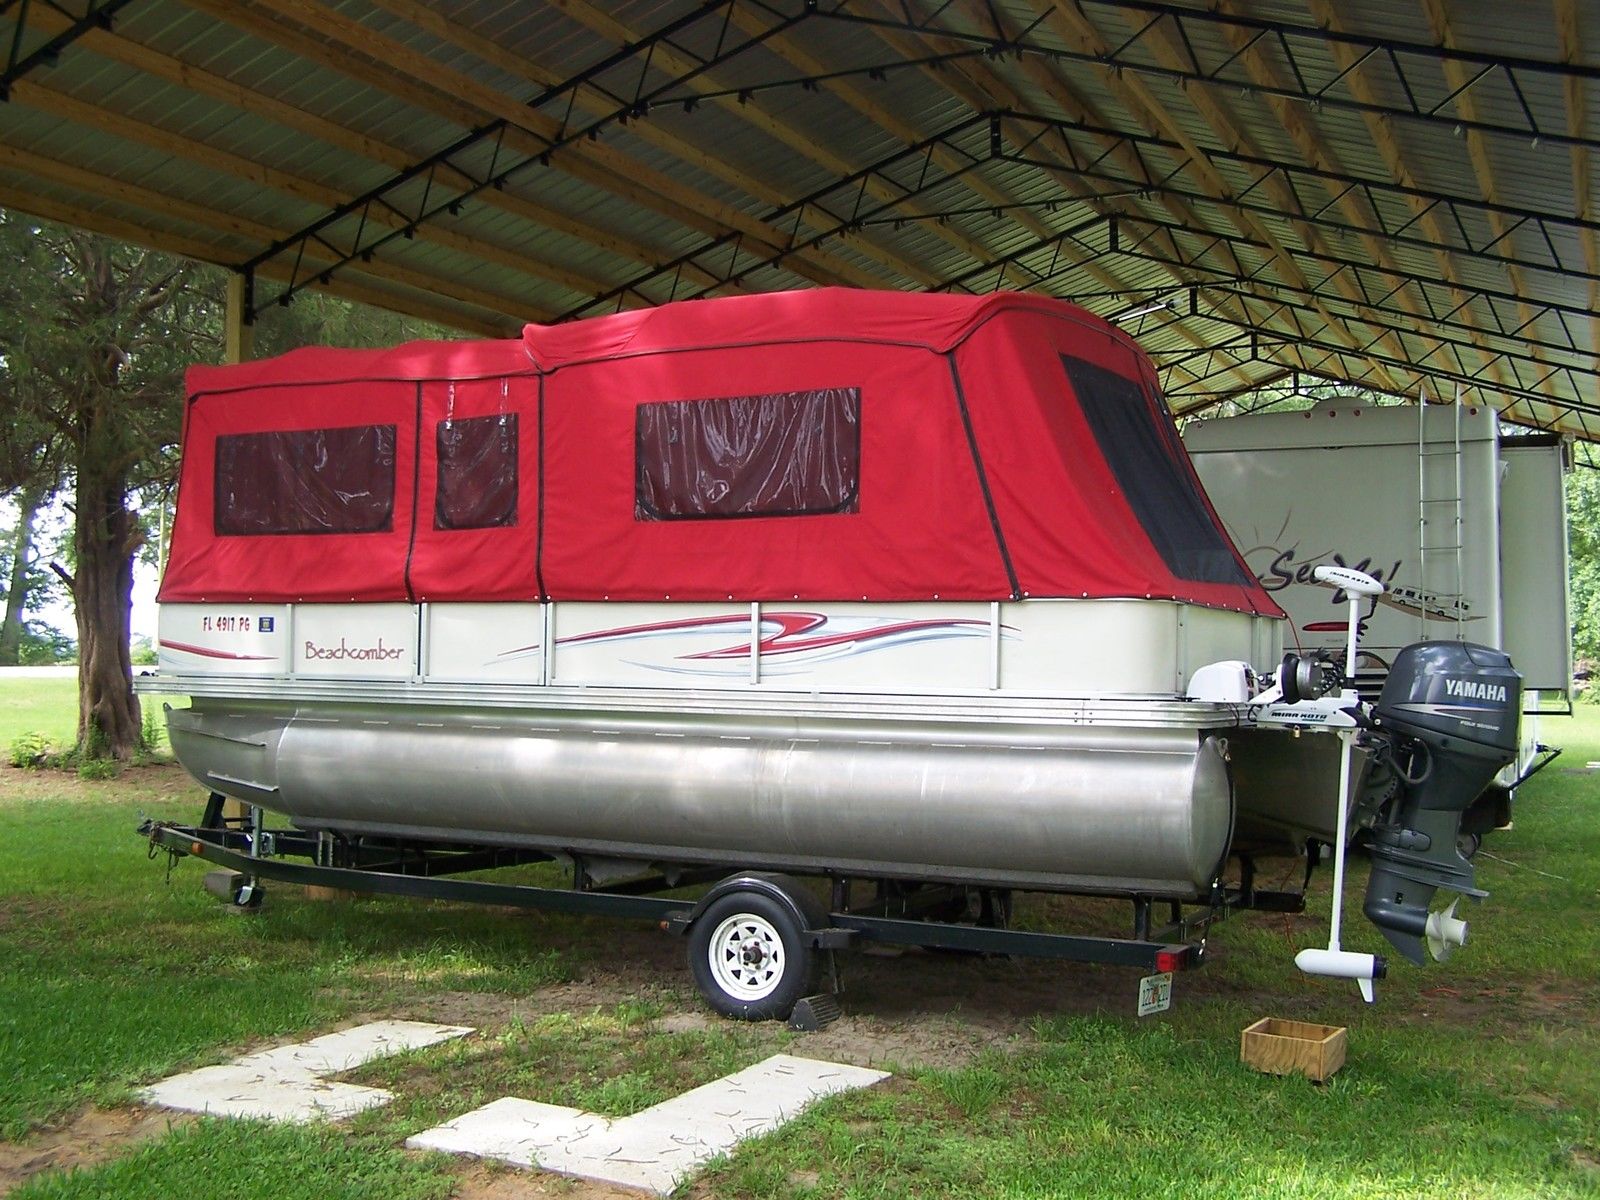 BEACHCOMBER PONTOON BOAT 2006 for sale for $17,900 - Boats ...